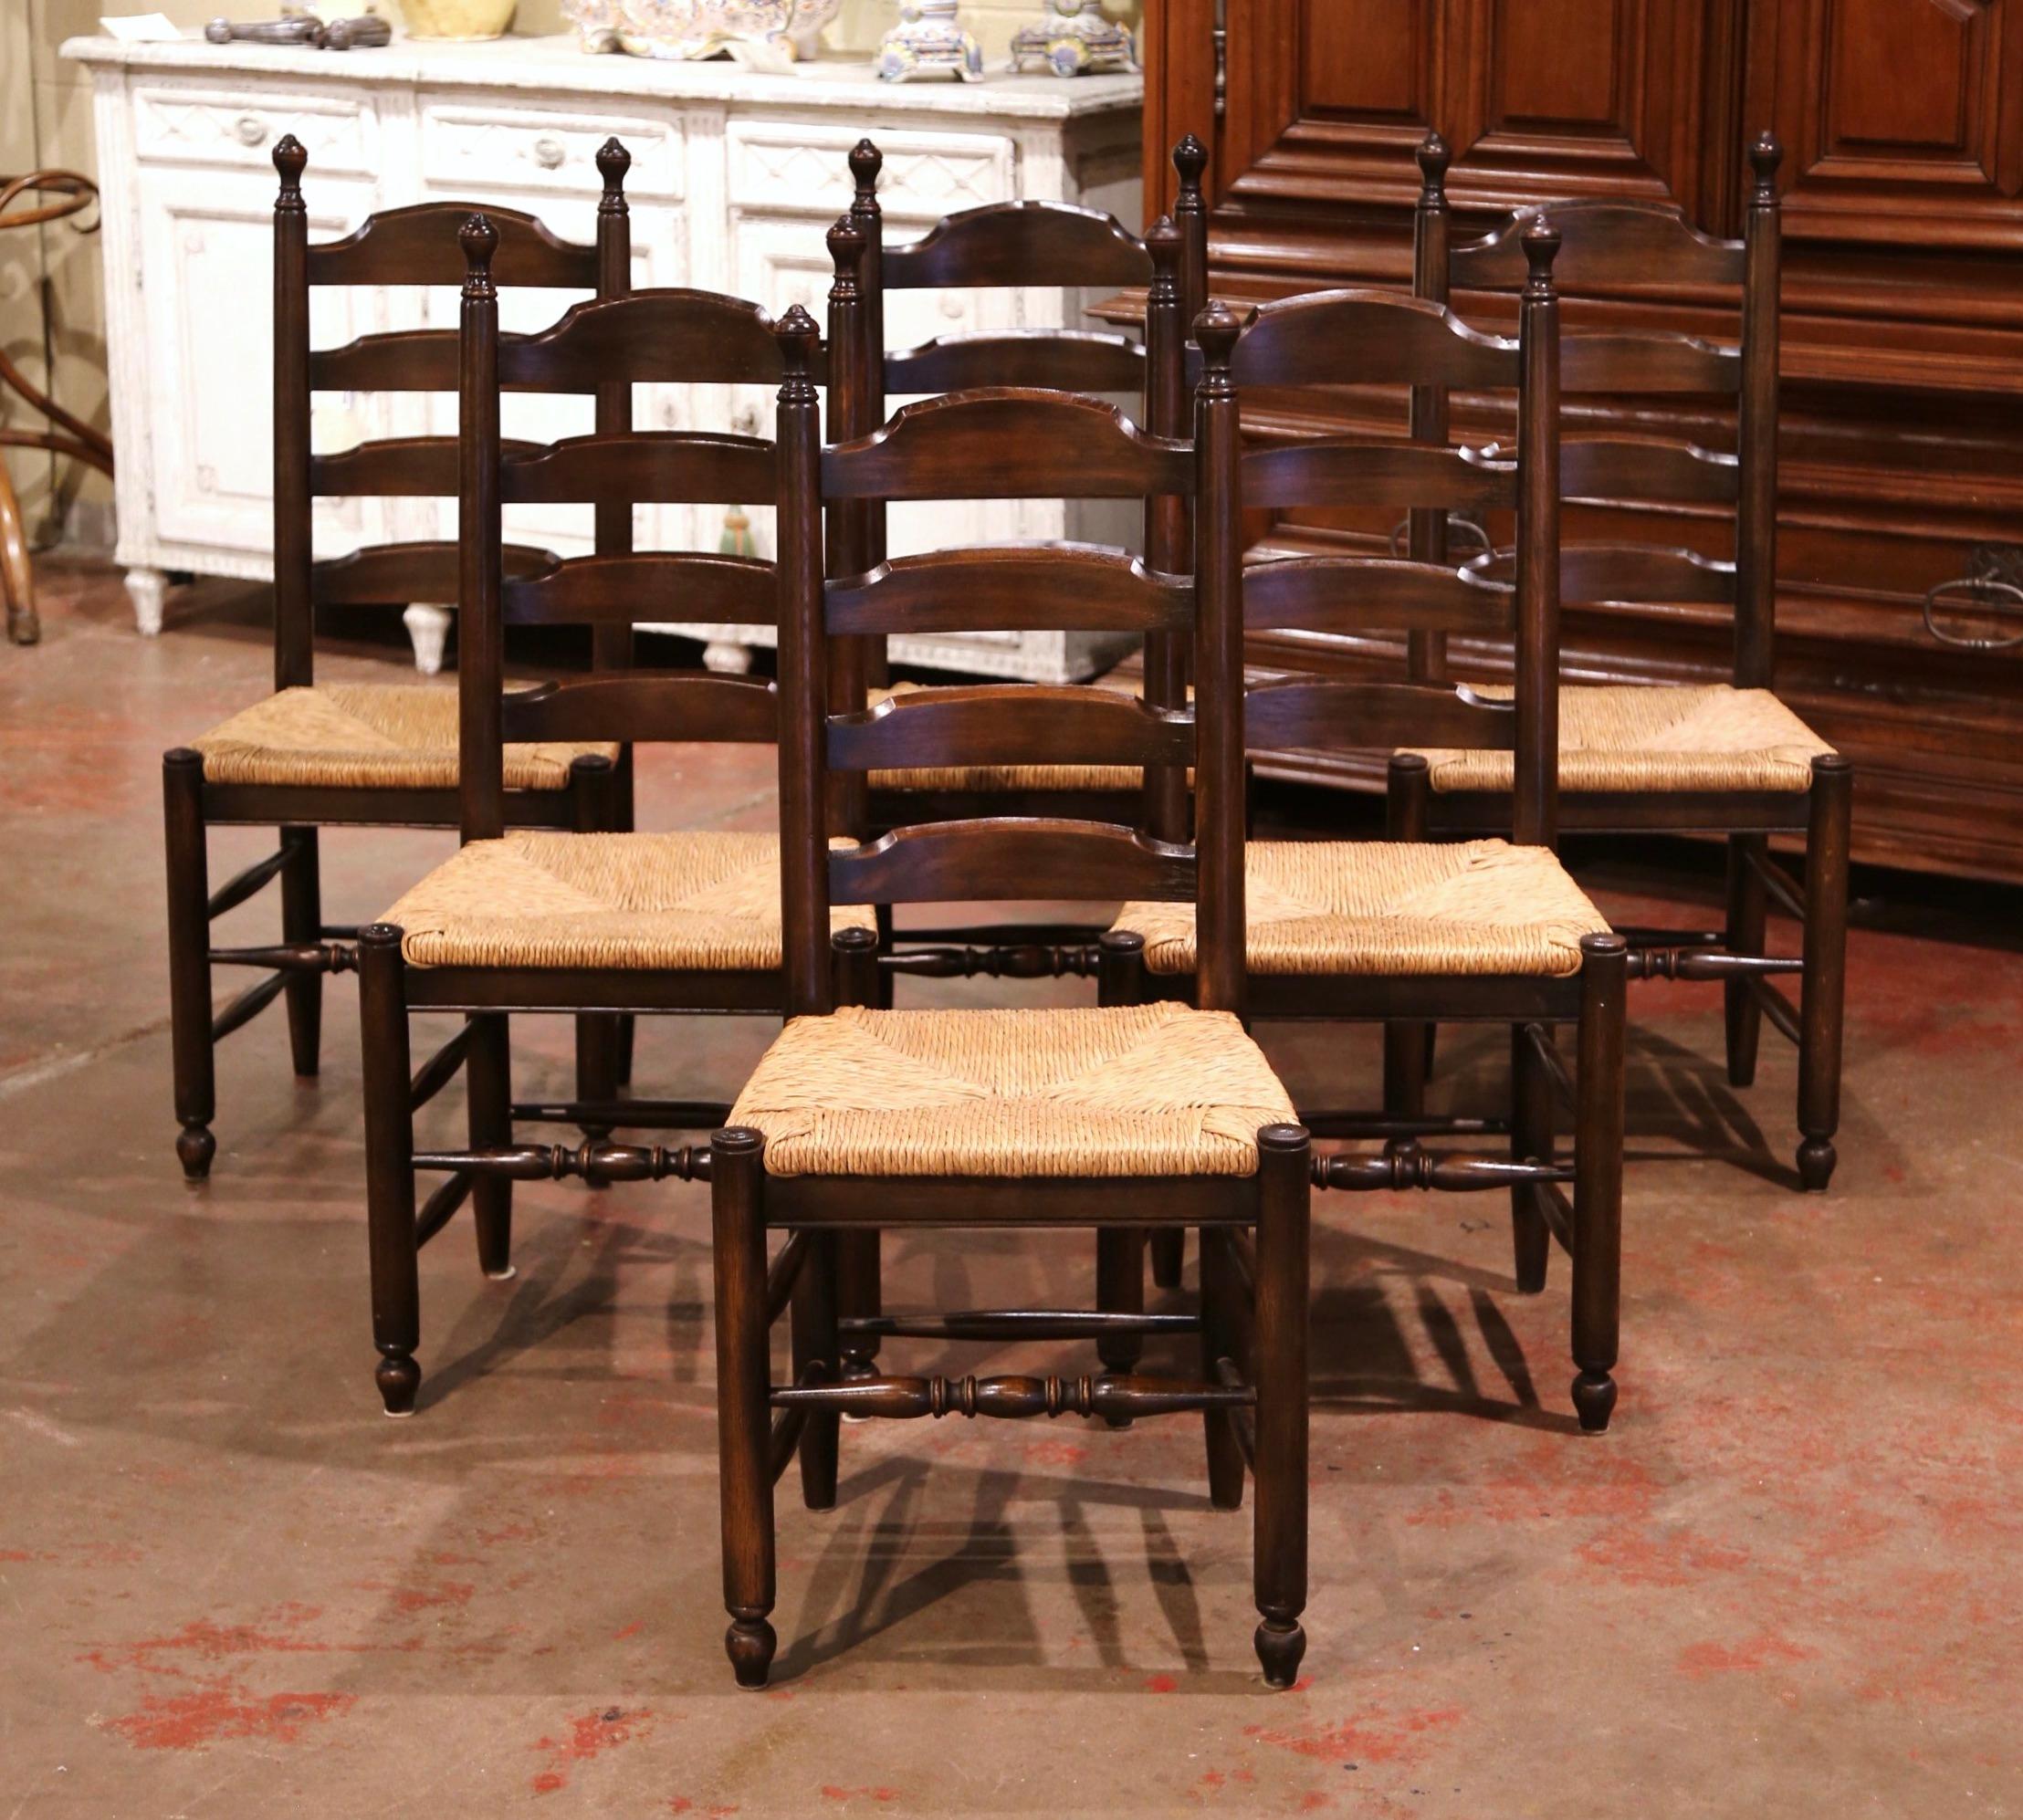 These elegant six country chairs were crafted in France, circa 1990. Carved from solid oak, each chair has a tall pitched back for ultimate comfort, and decorated with four ladders across and embellished with decorative finials at the top. The seats